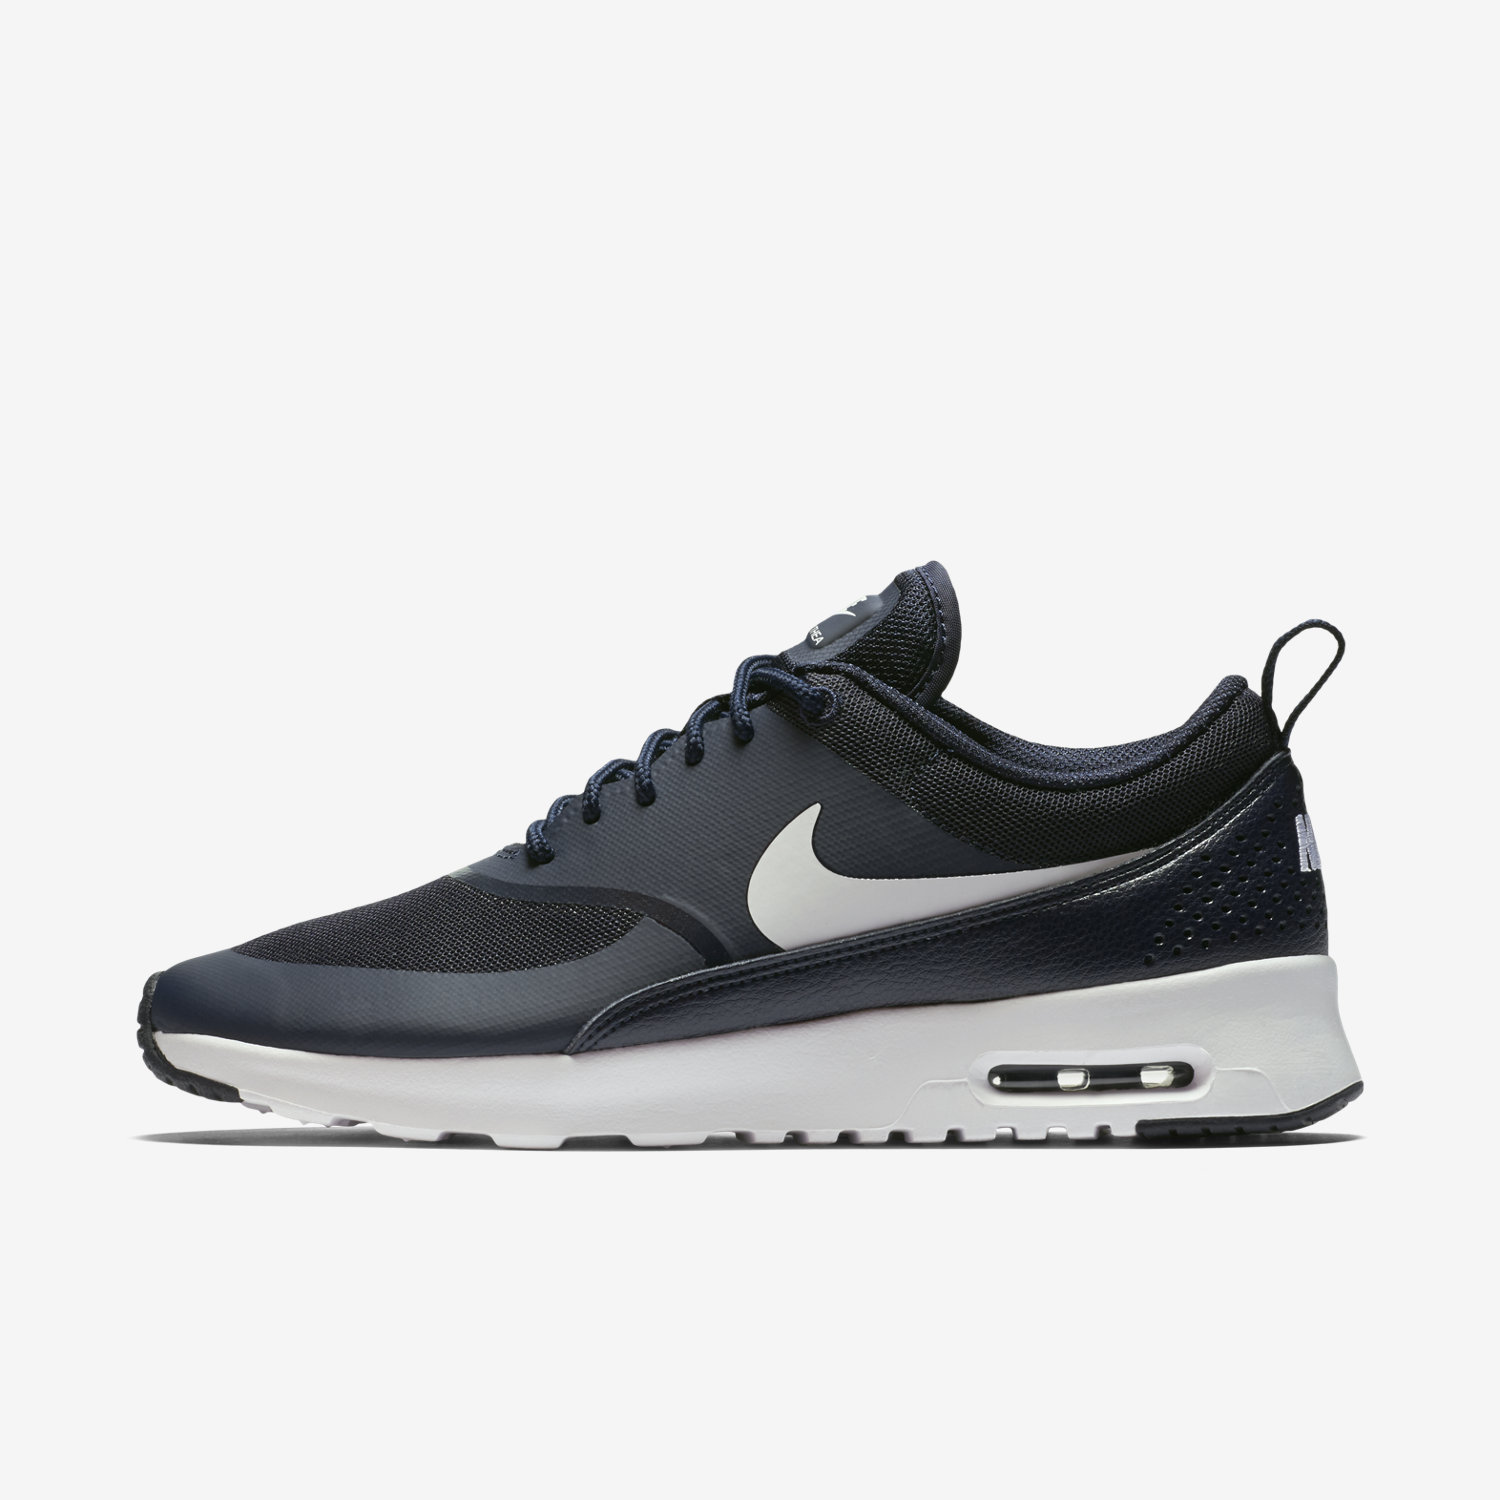 nike lutte chaussures 2011 2012 - Chaussure Nike Air Max Thea pour Femme. Nike.com BE